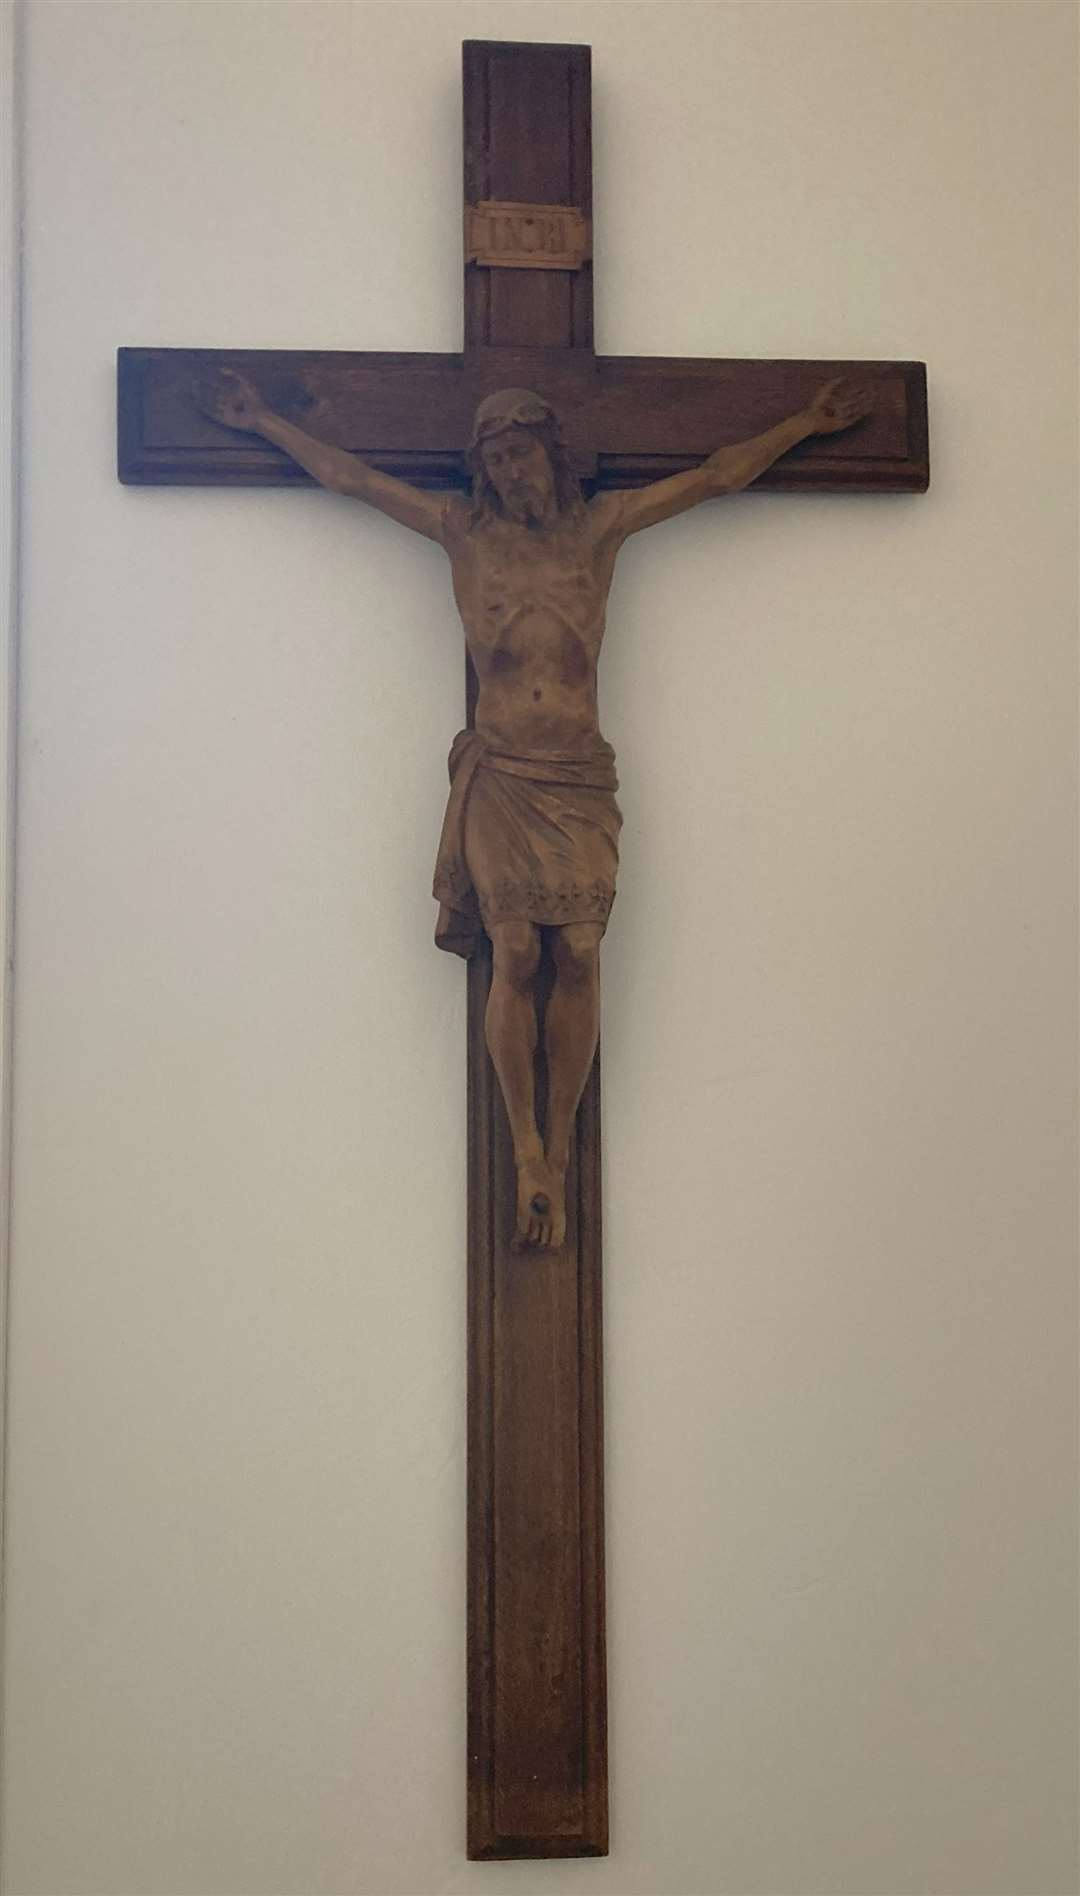 Crucifix at St Michael and All Angels Church.